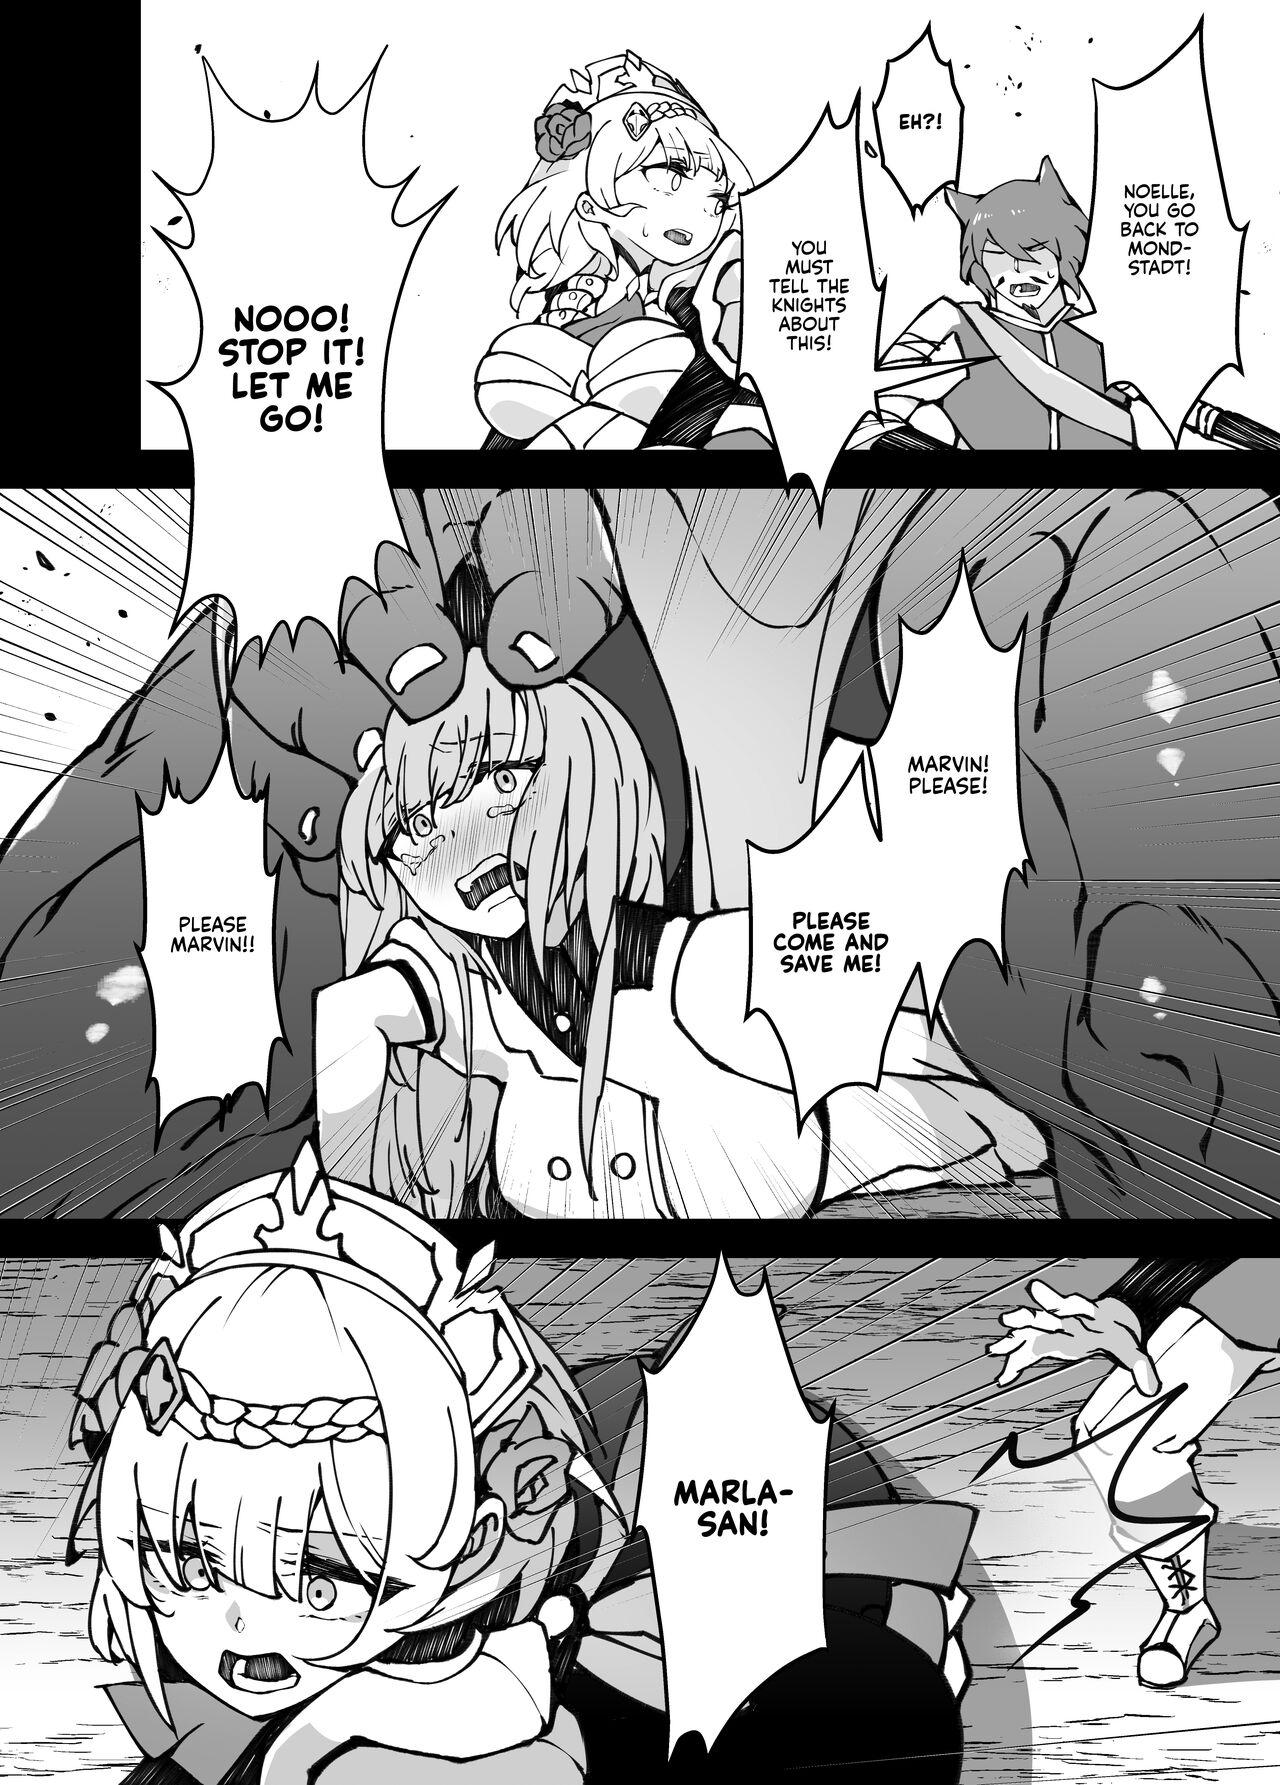 Free Hardcore Porn [Karouke (Karou)] The Attack of the Hilichurls II ~The Invasion's Prelude~ Noelle,Chivalric Blossom that withered~ (Genshin Impact) [English] [Kyuume] [Digital] - Genshin impact Ejaculation - Page 11